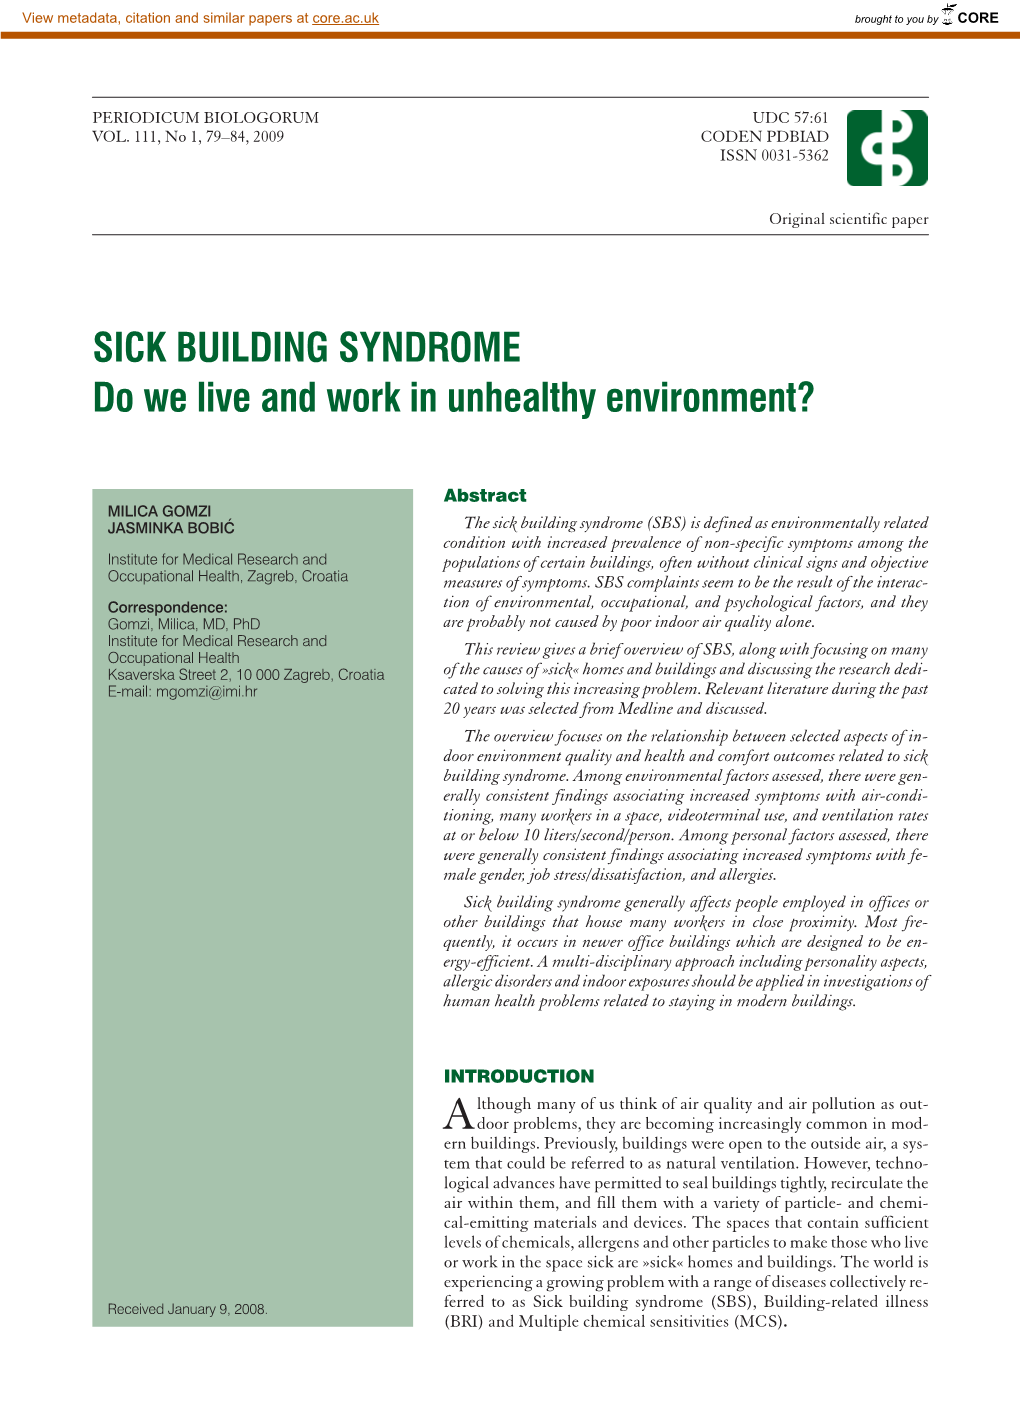 SICK BUILDING SYNDROME Do We Live and Work in Unhealthy Environment?